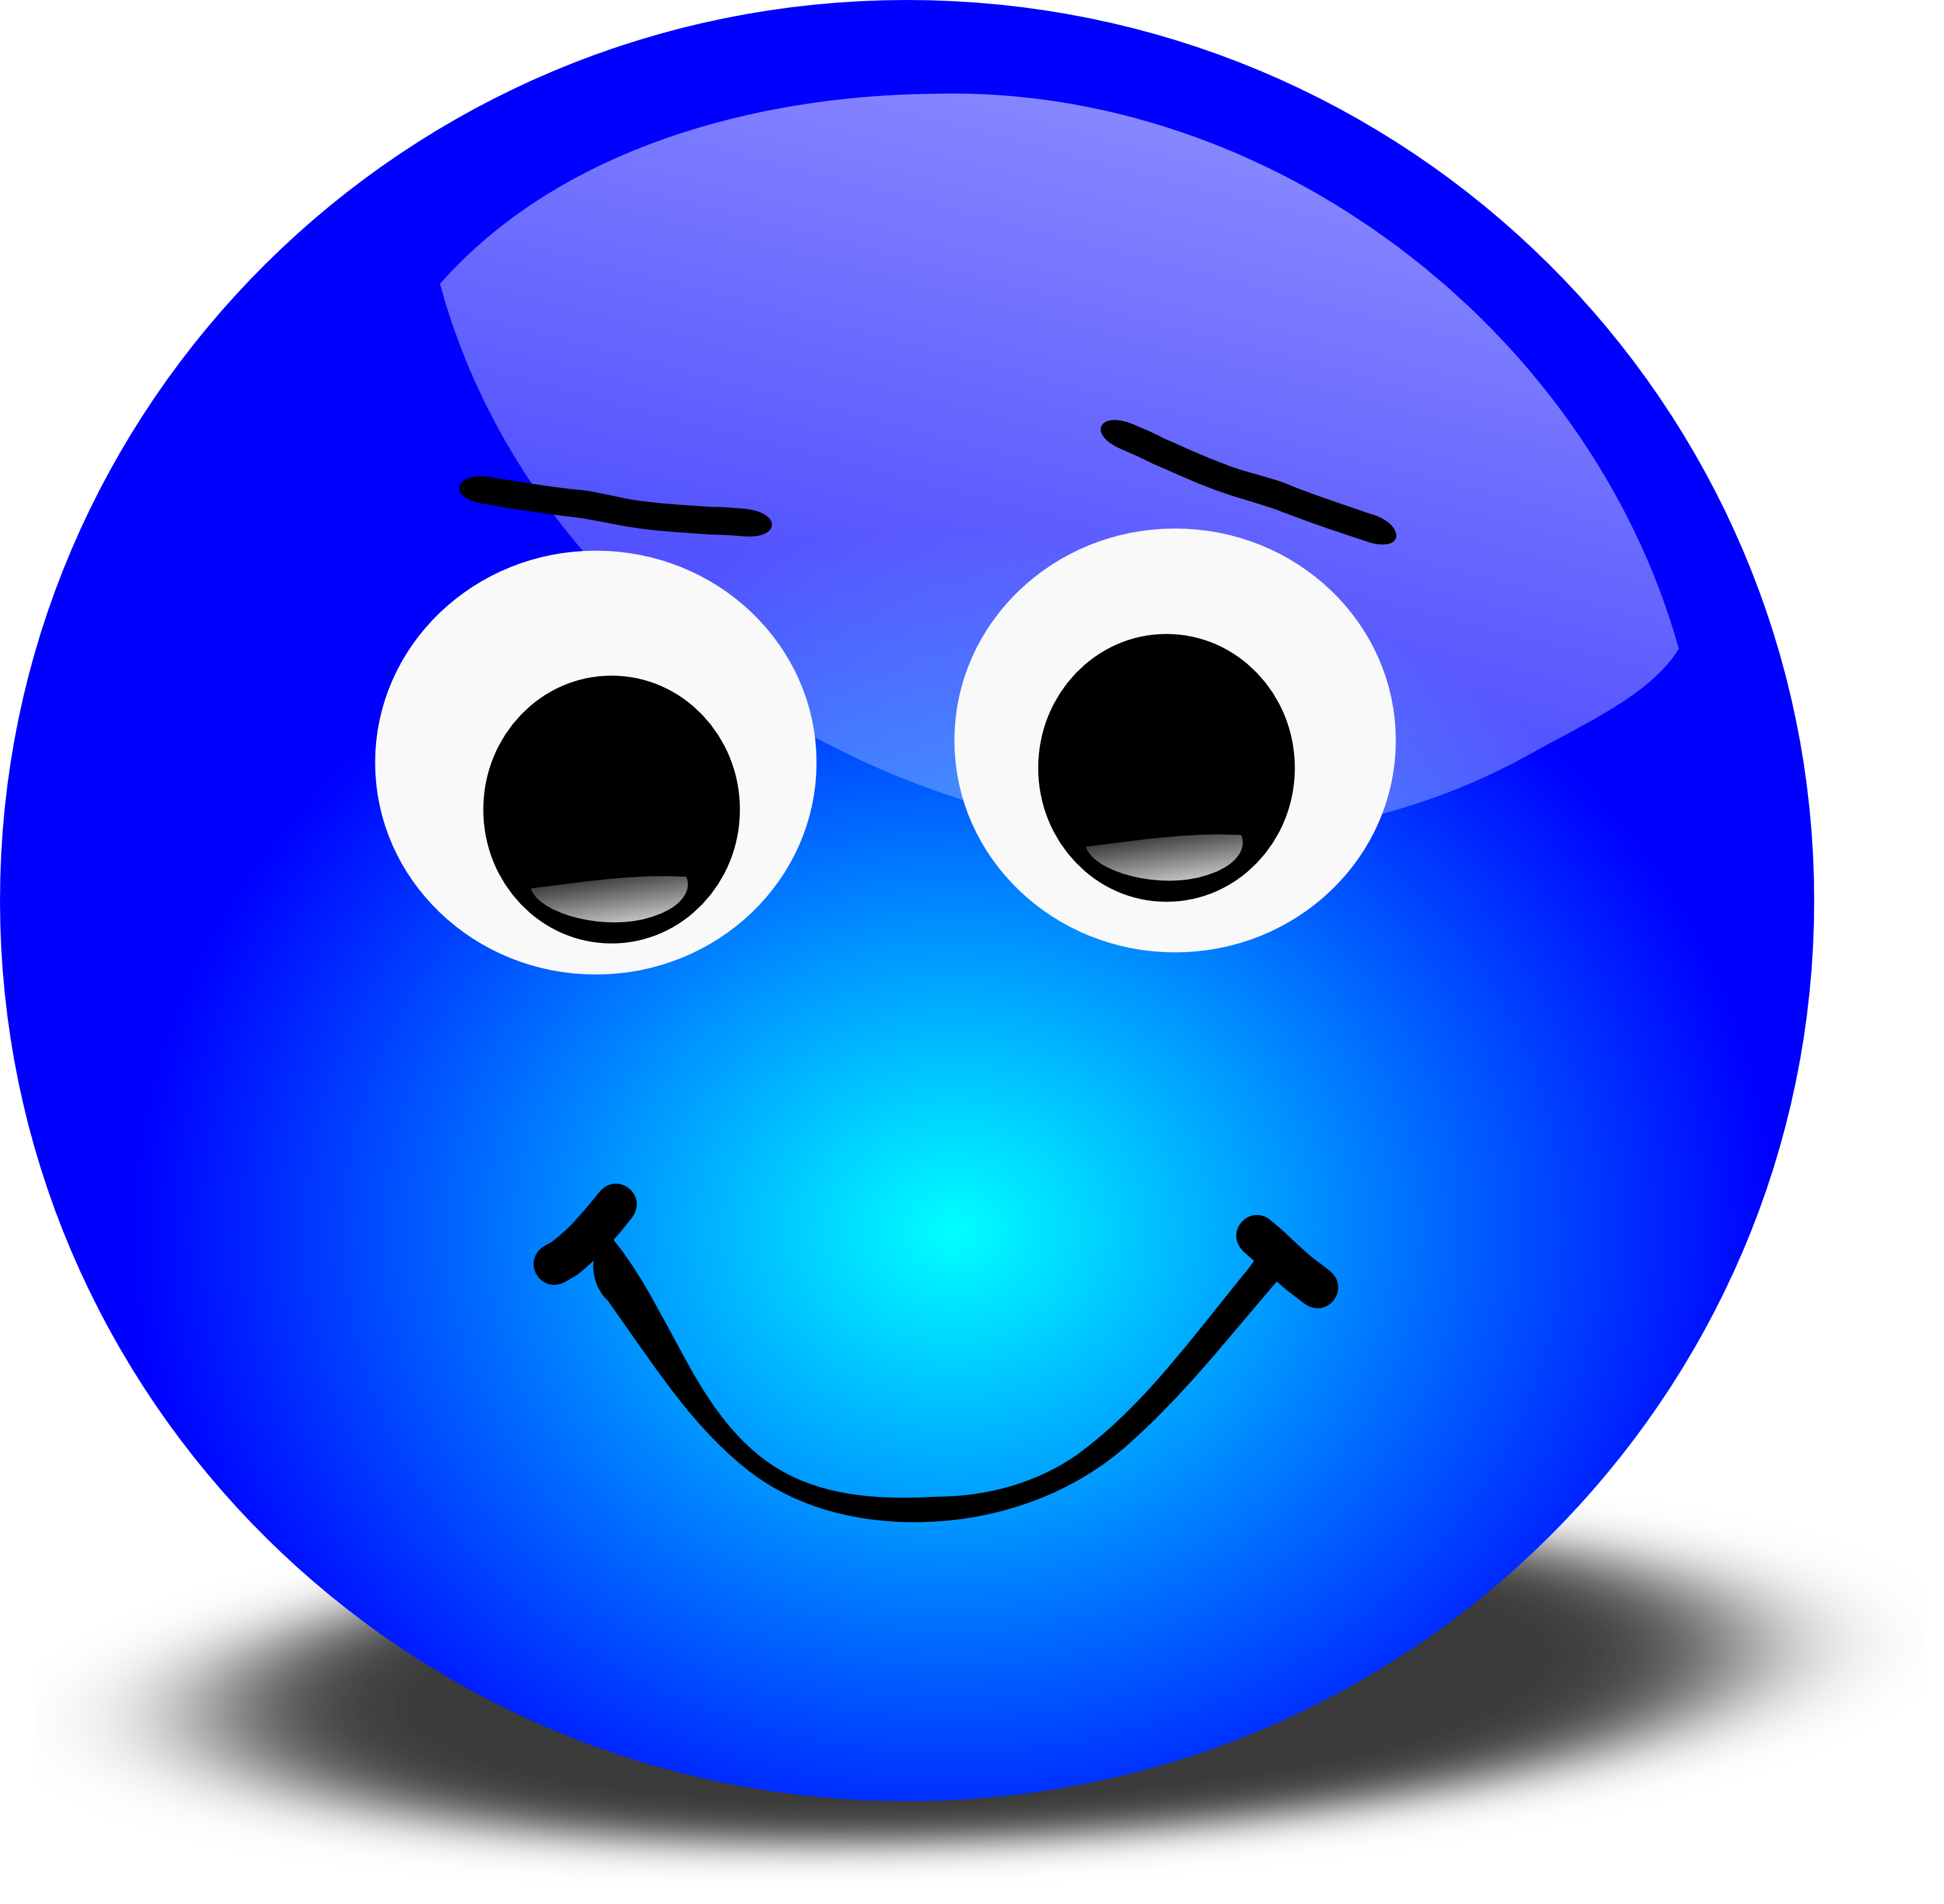 Smiley Face Png | Clipart Panda - Free Clipart Images